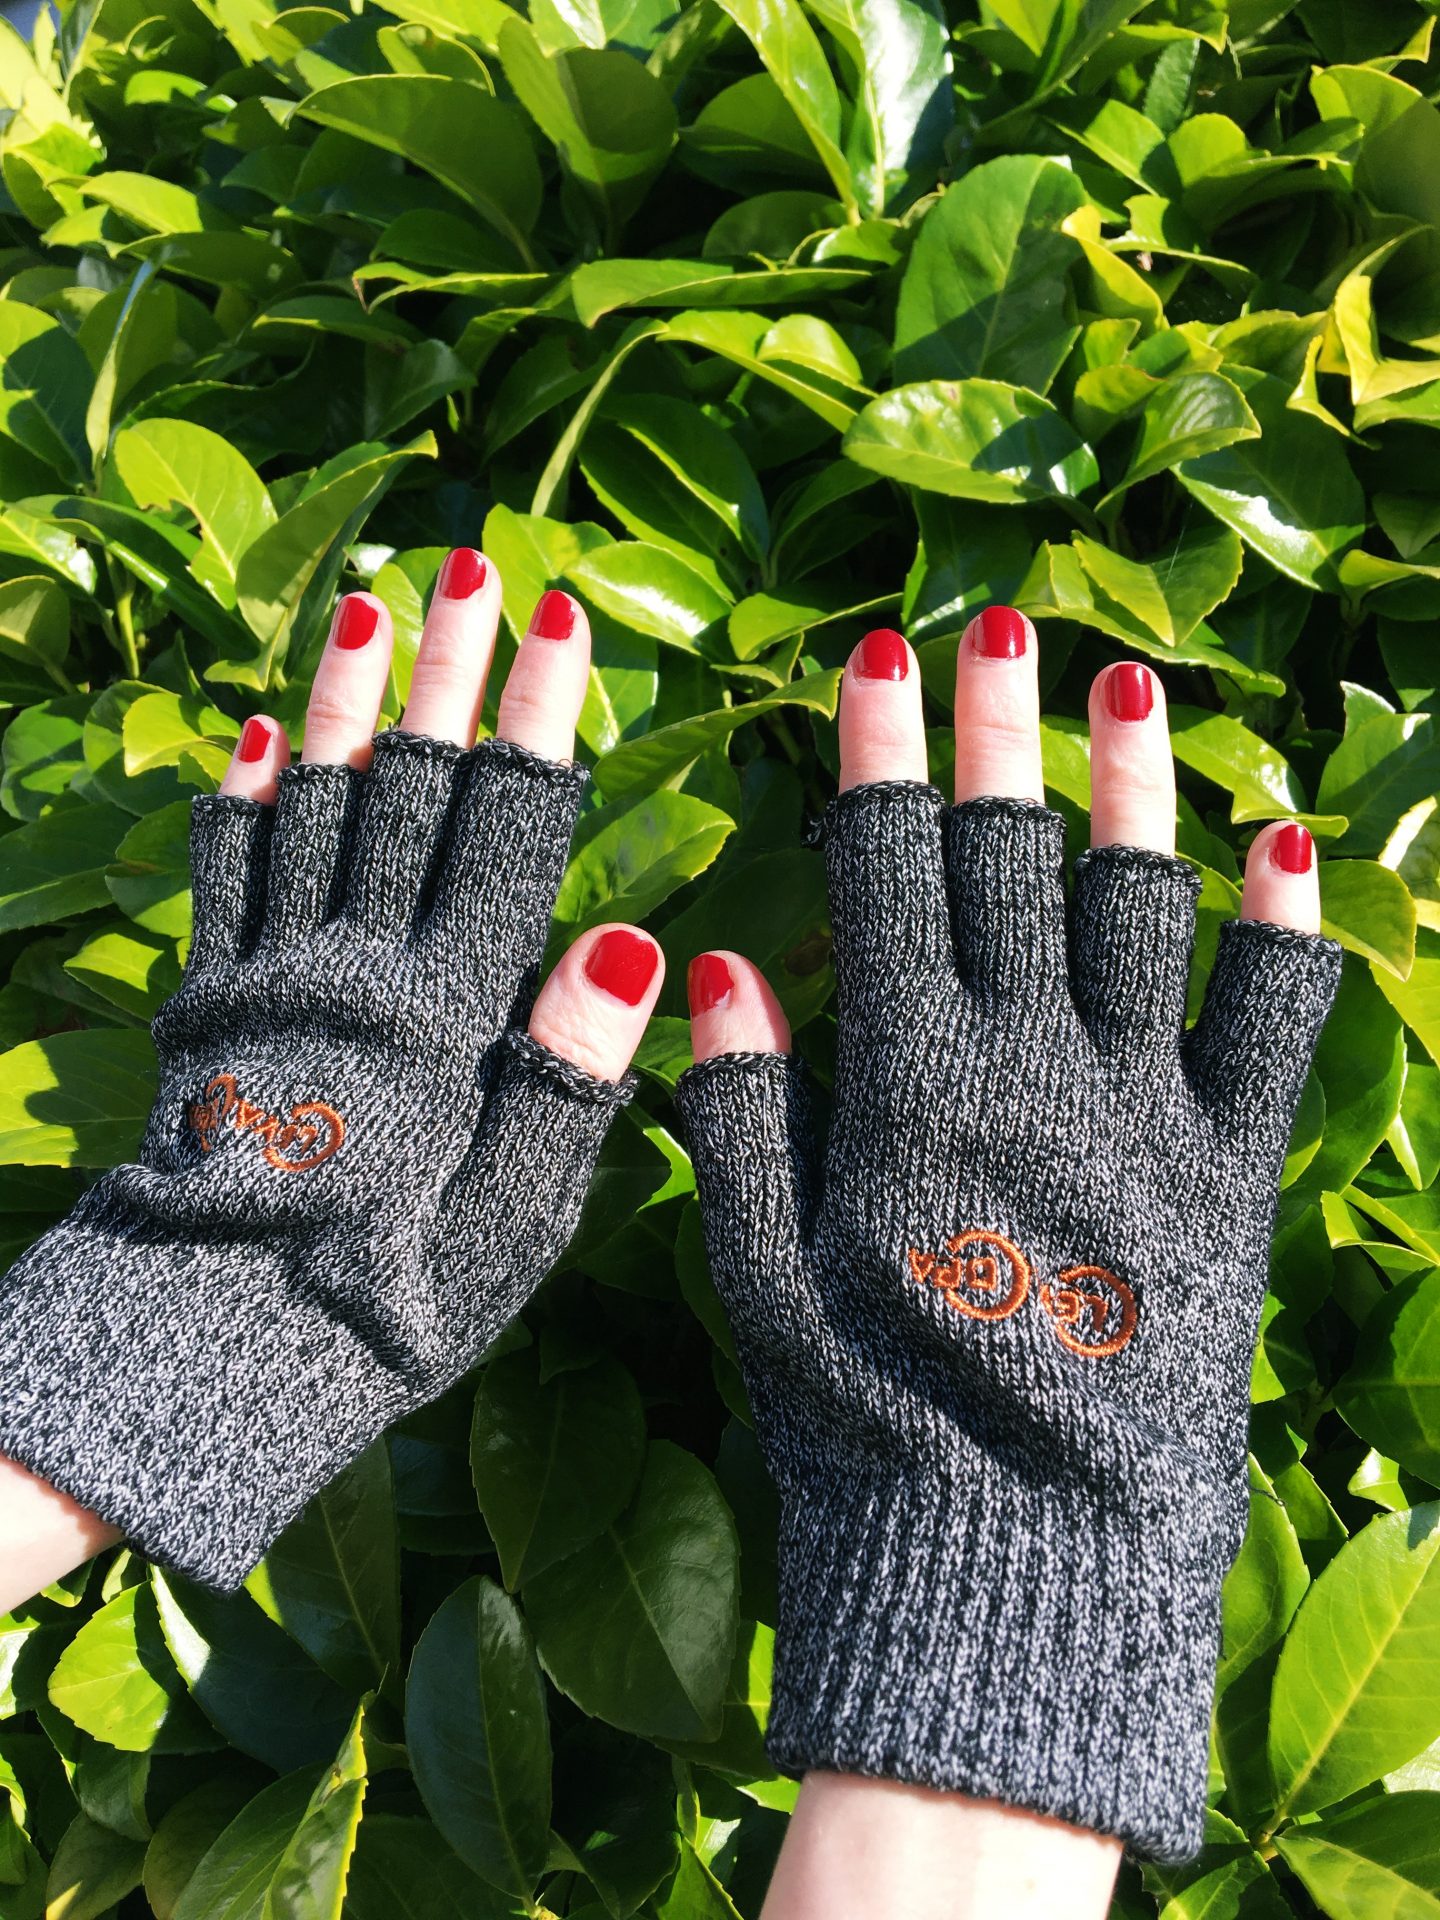 A close-up photo of my hands wearing the grey fingerless knit gloves from Copper Clothing that I was kindly gifted for this review. My hands are held up with the green leaves of the plant in my garden as the background.